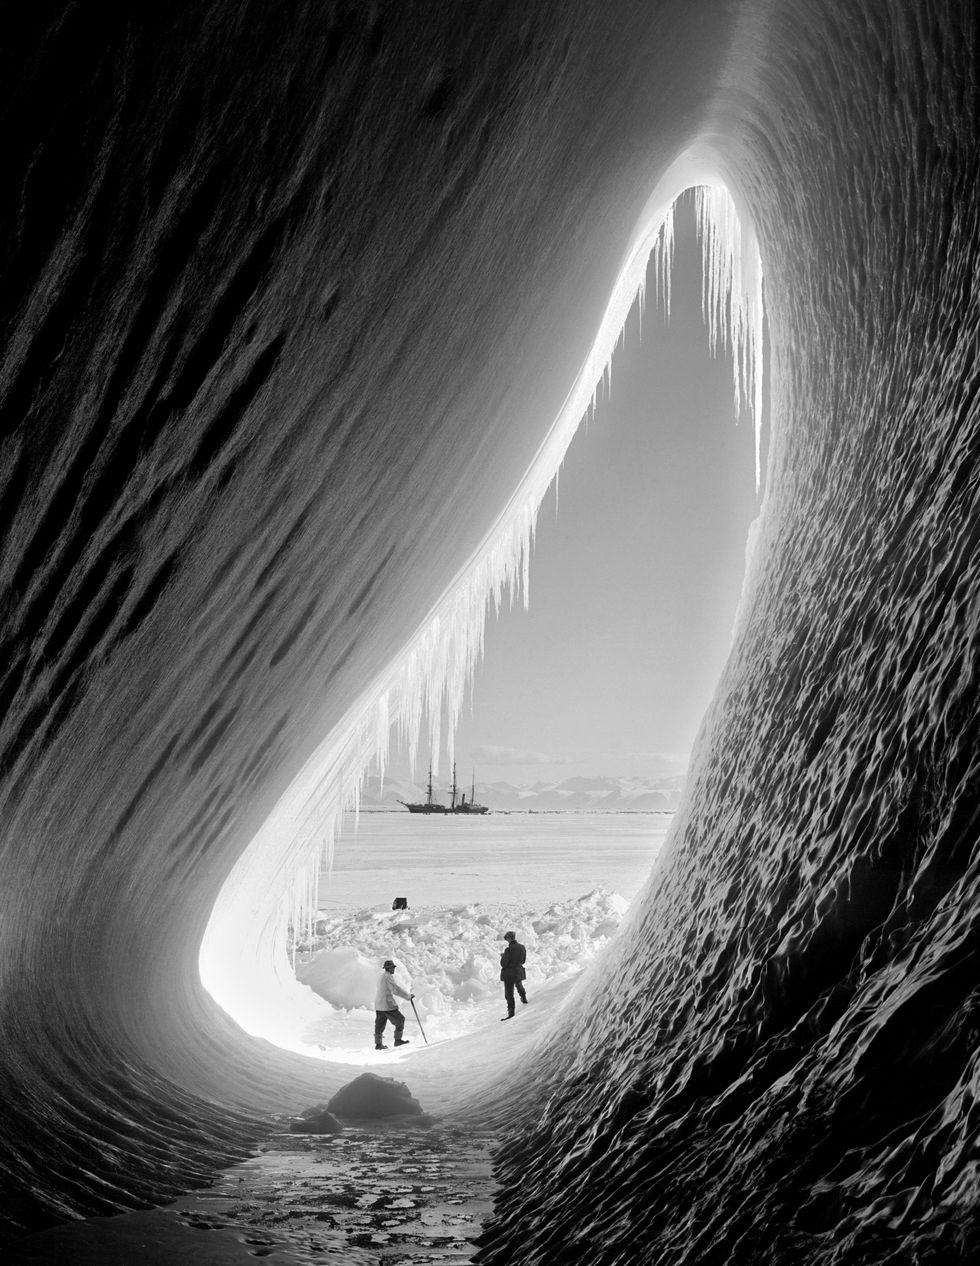 geologist thomas griffith taylor 1880 1963 and meteorologist charles wright 1887 1975 in the entrance to an ice grotto during captain robert falcon scotts terra nova expedition to the antarctic, 5th january 1911 the terra nova is in the background photo by herbert pontingscott polar research institute, university of cambridgegetty images